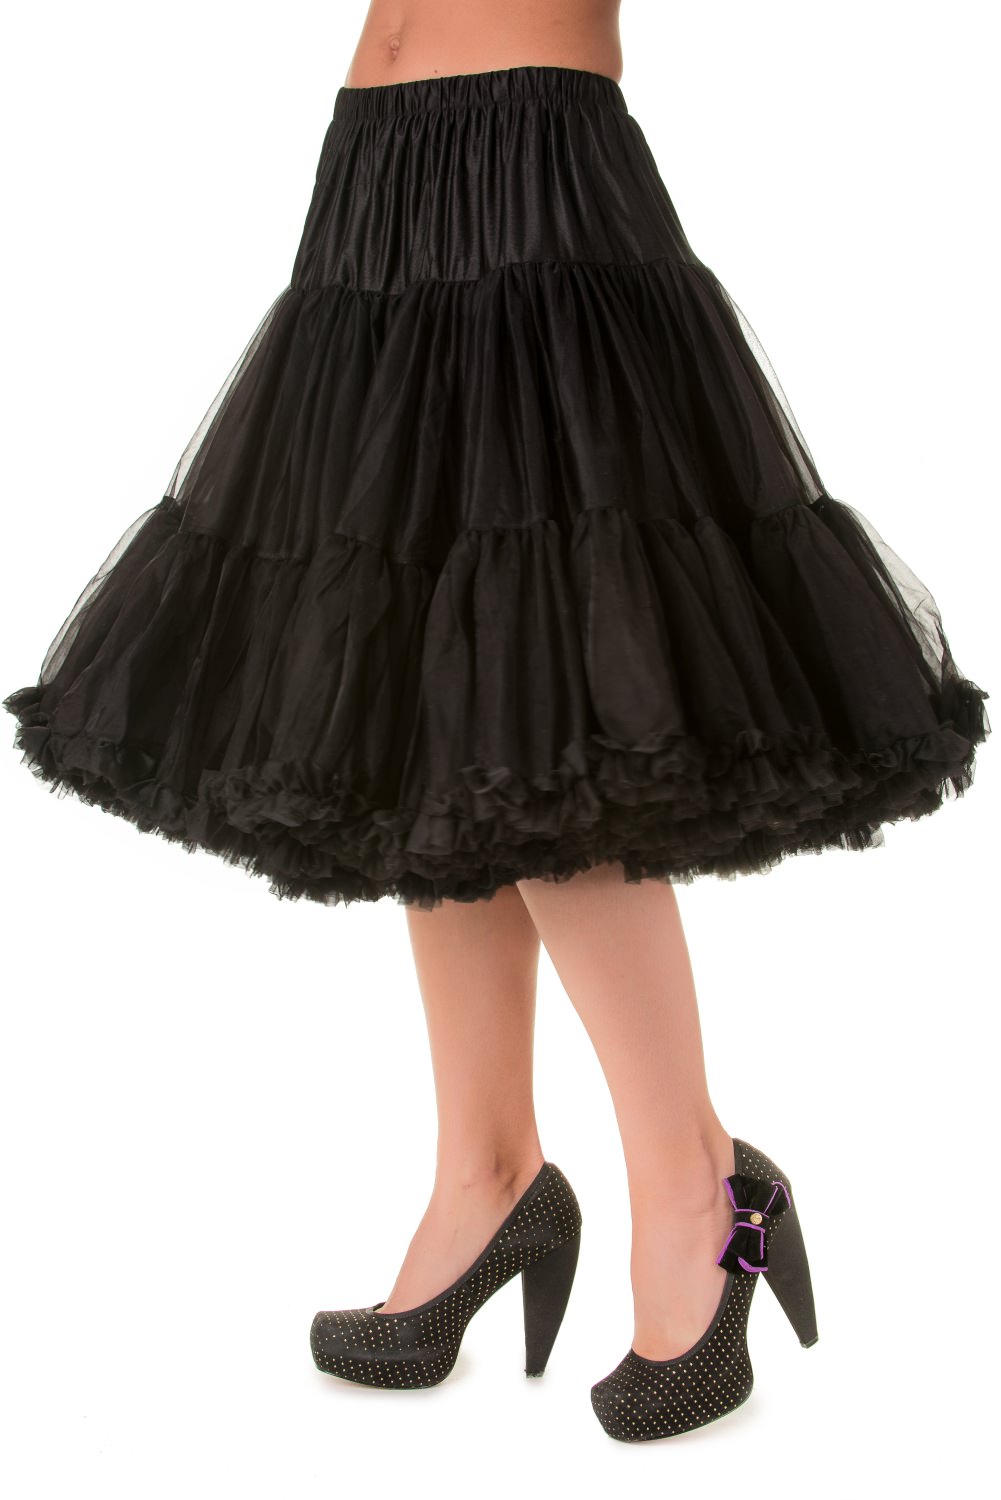 Banned Black Lifeforms 26 Inch Petticoat